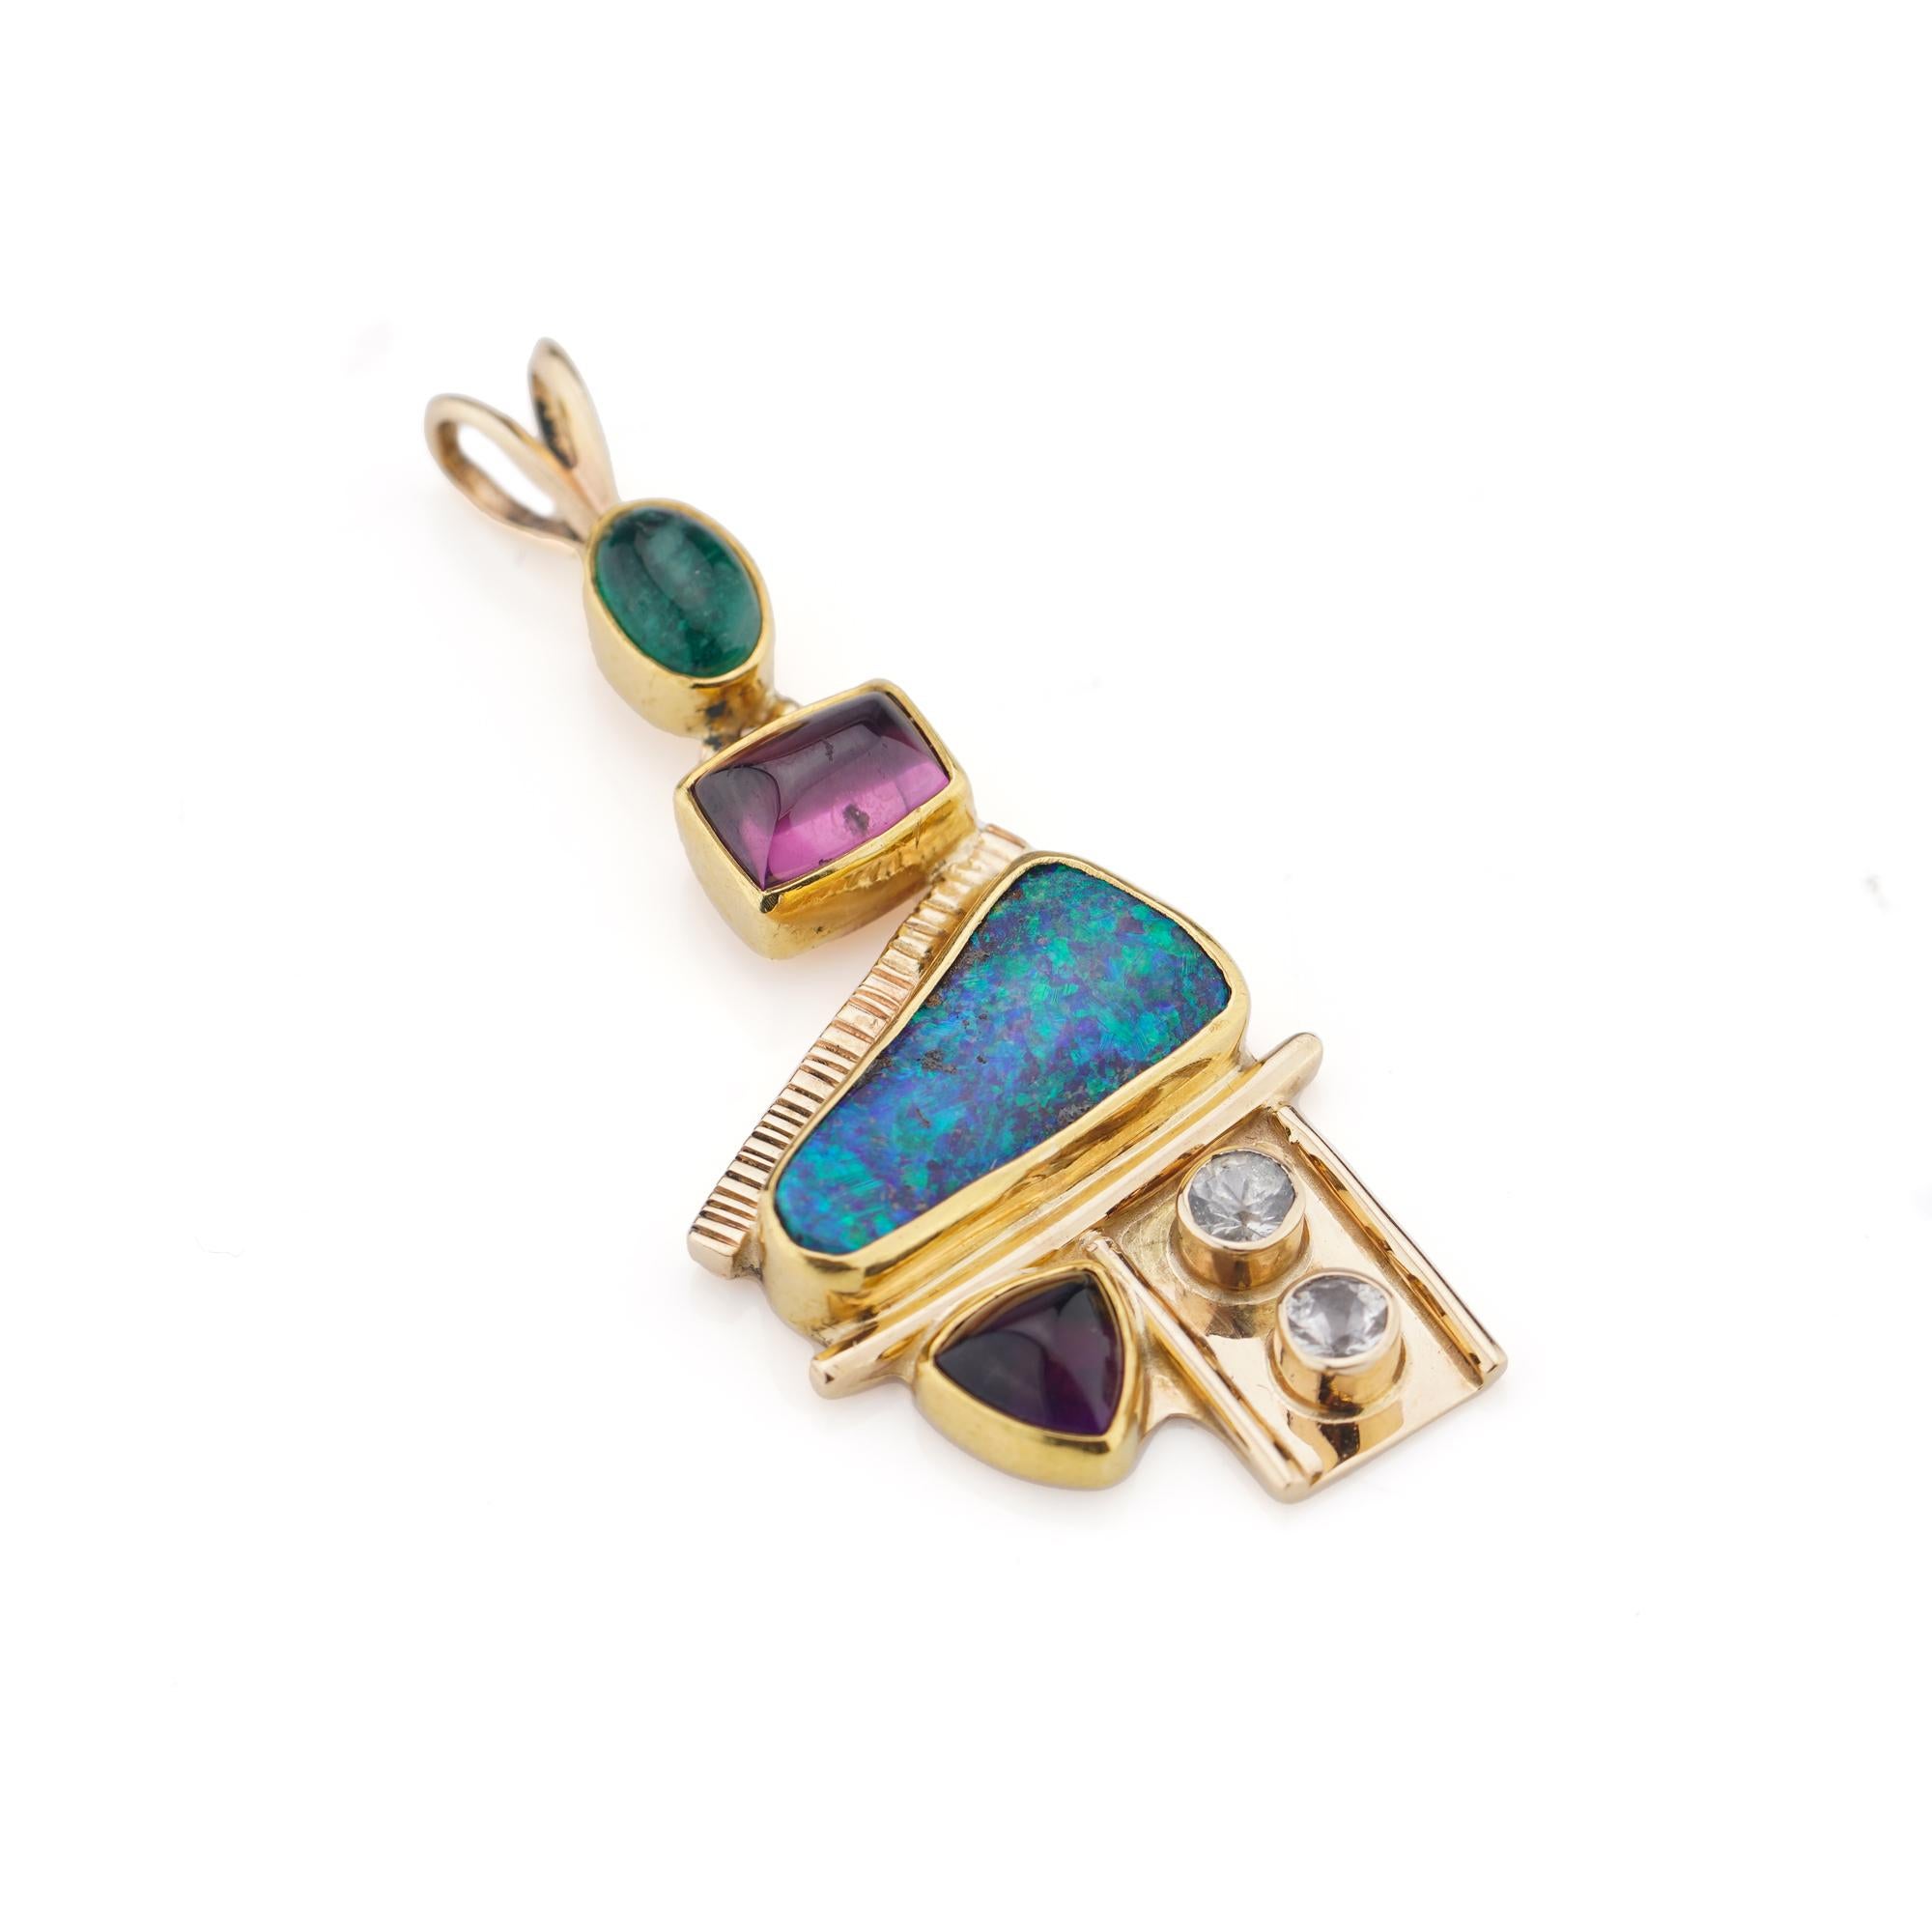 14kt yellow gold pendant with opal, diamonds, emerald, amethyst, and pink spinel. 
Made in the 1990s
Tested positive for 14kt. gold. 

Dimensions - 
Weight: 6.24 grams
Length x width x depth: 4.5 x 2 x 0.5 cm 

Opal -
Cut: triangular 
Size: 15 mm